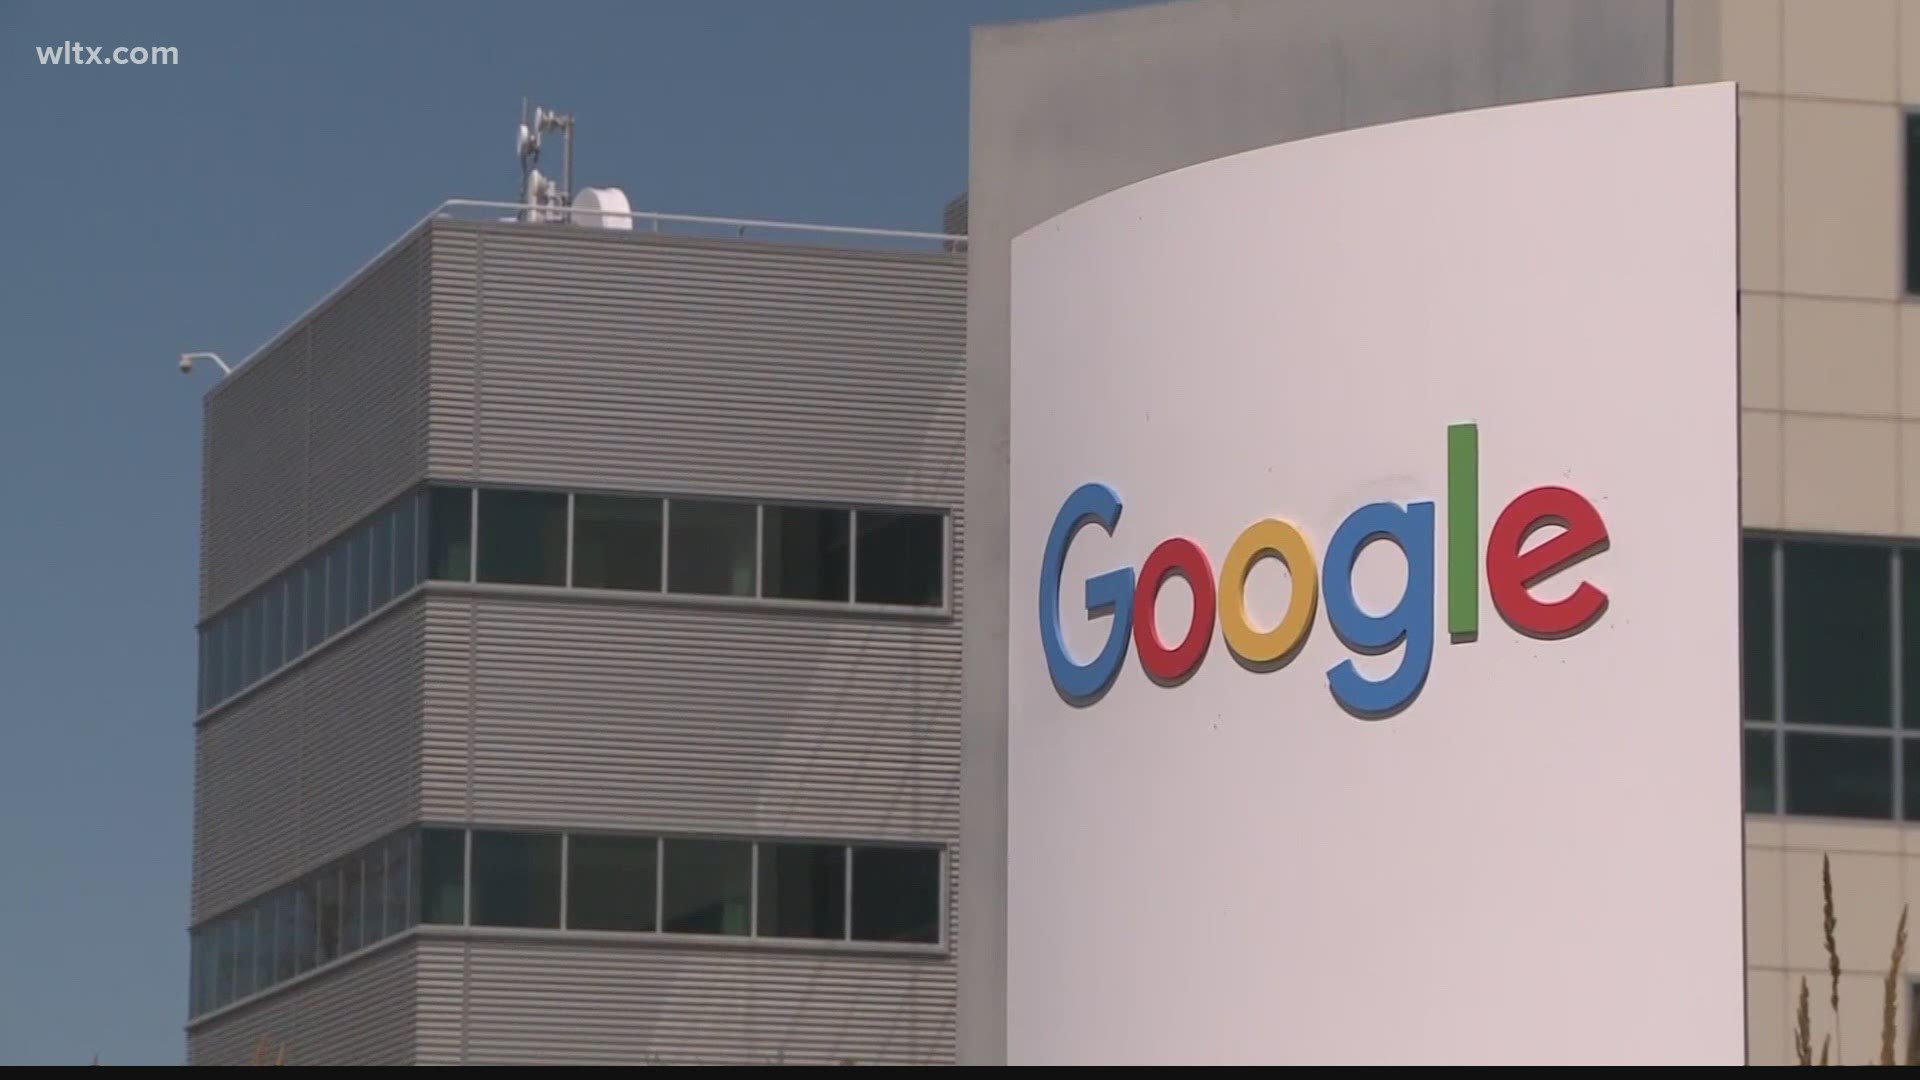 Google has announced plans to invest $500 million in South Carolina, expanding to Berkeley County